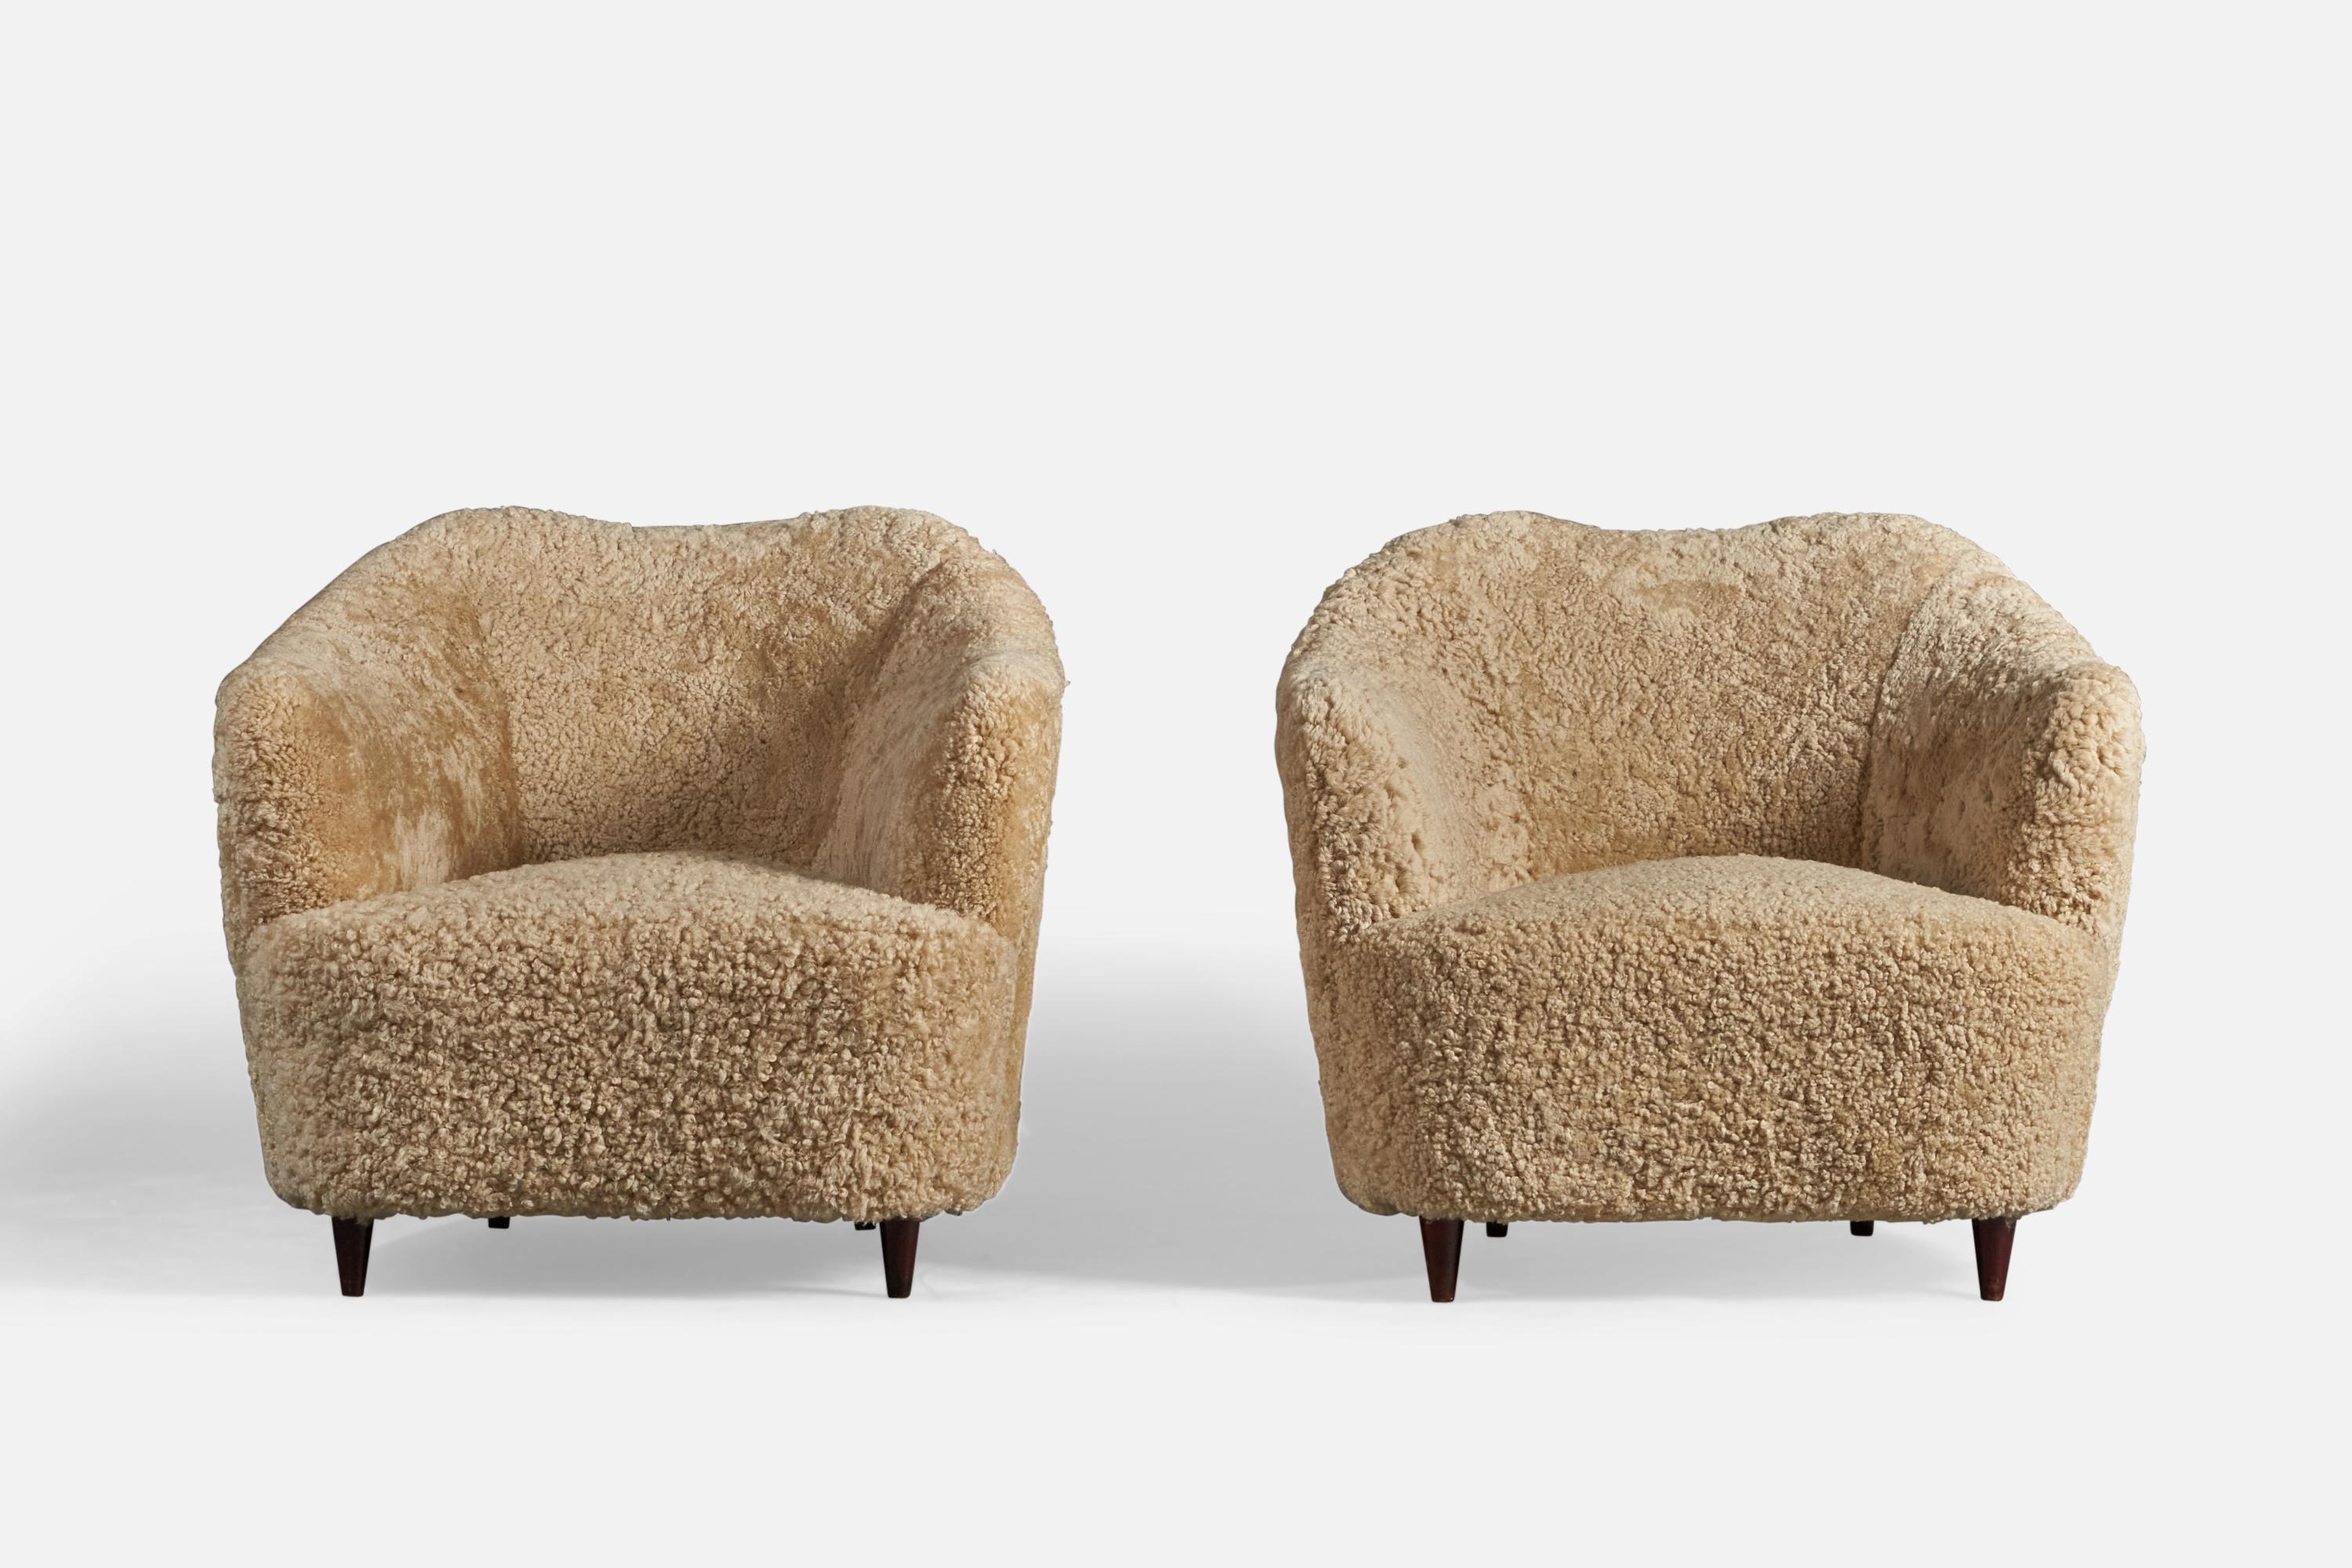 Mid-20th Century Gio Ponti Attribution, Lounge Chairs, Shearling, Wood, Italy, 1940s For Sale